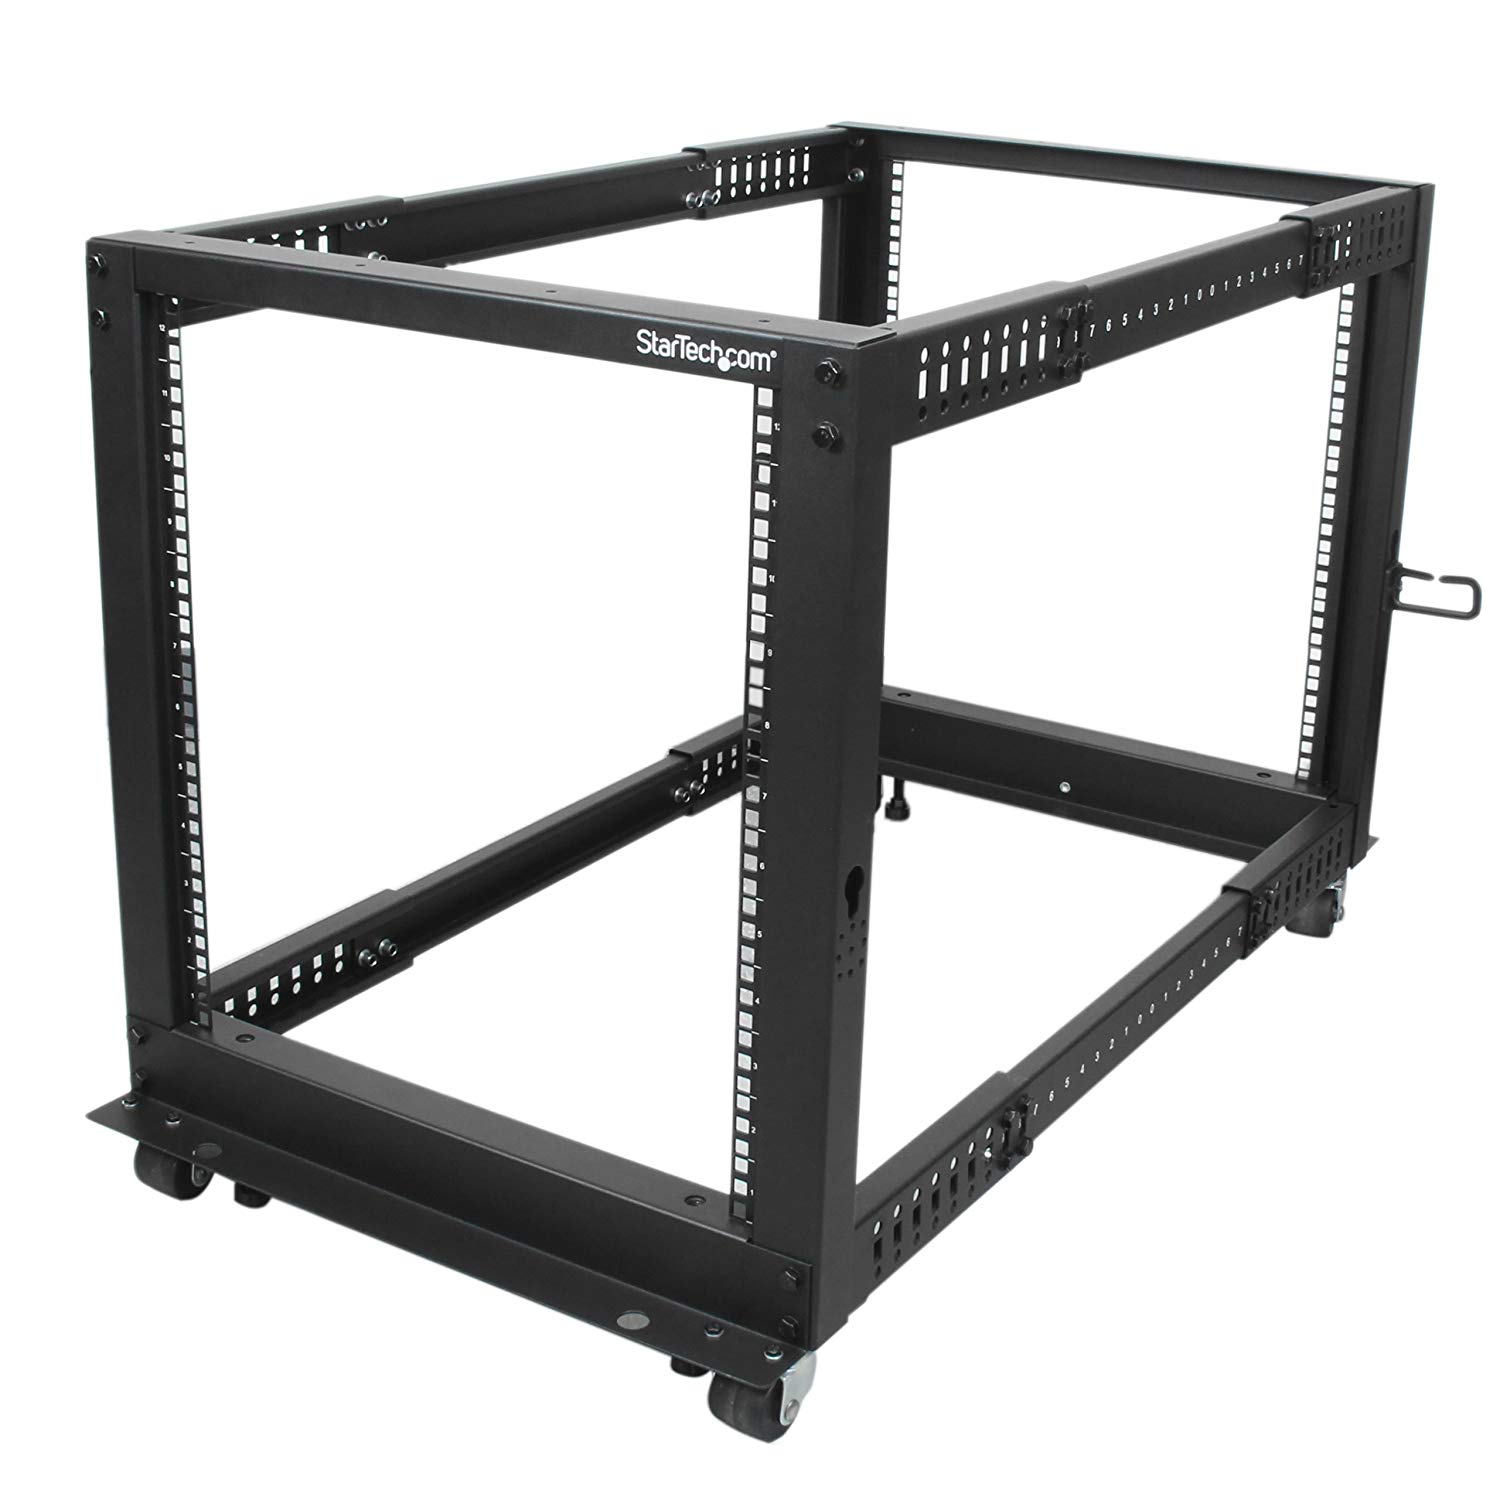 Rack Enclosure Manufacturer and Supplier in China - KDM